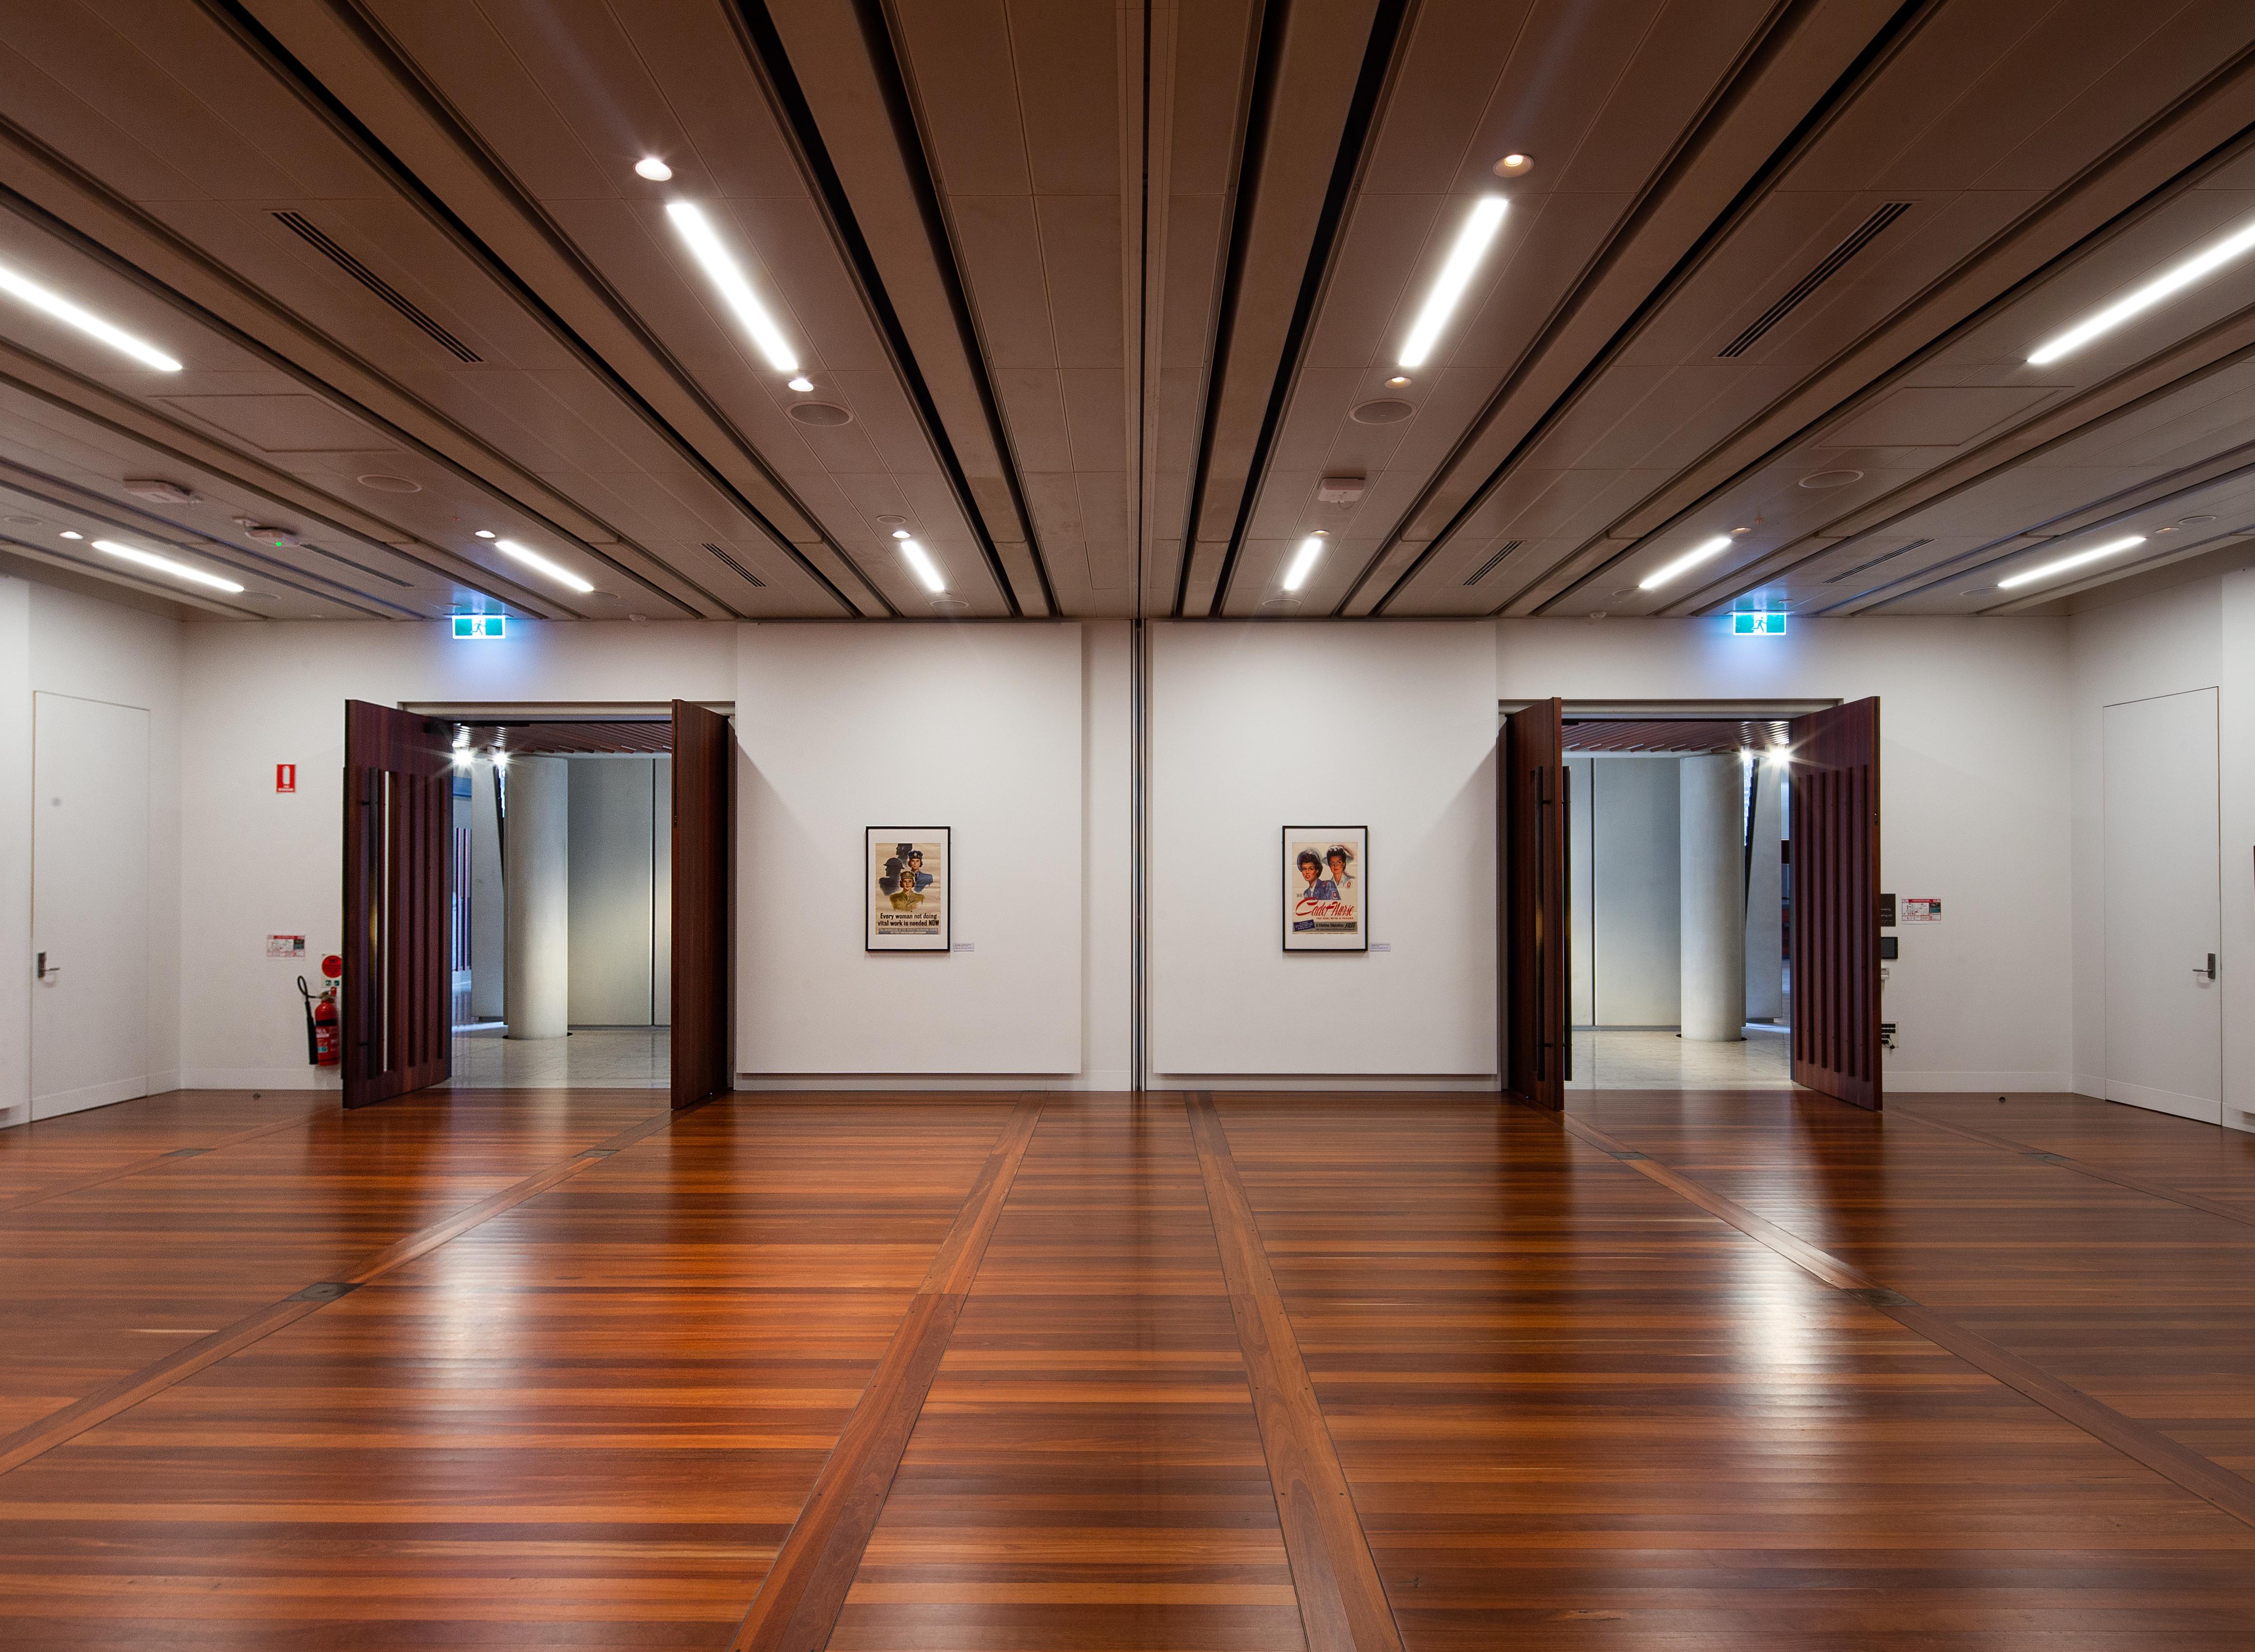 Interior view of the Anzac Memorial Auditorium. Partition divider at the end for dividing the space into two smaller rooms.